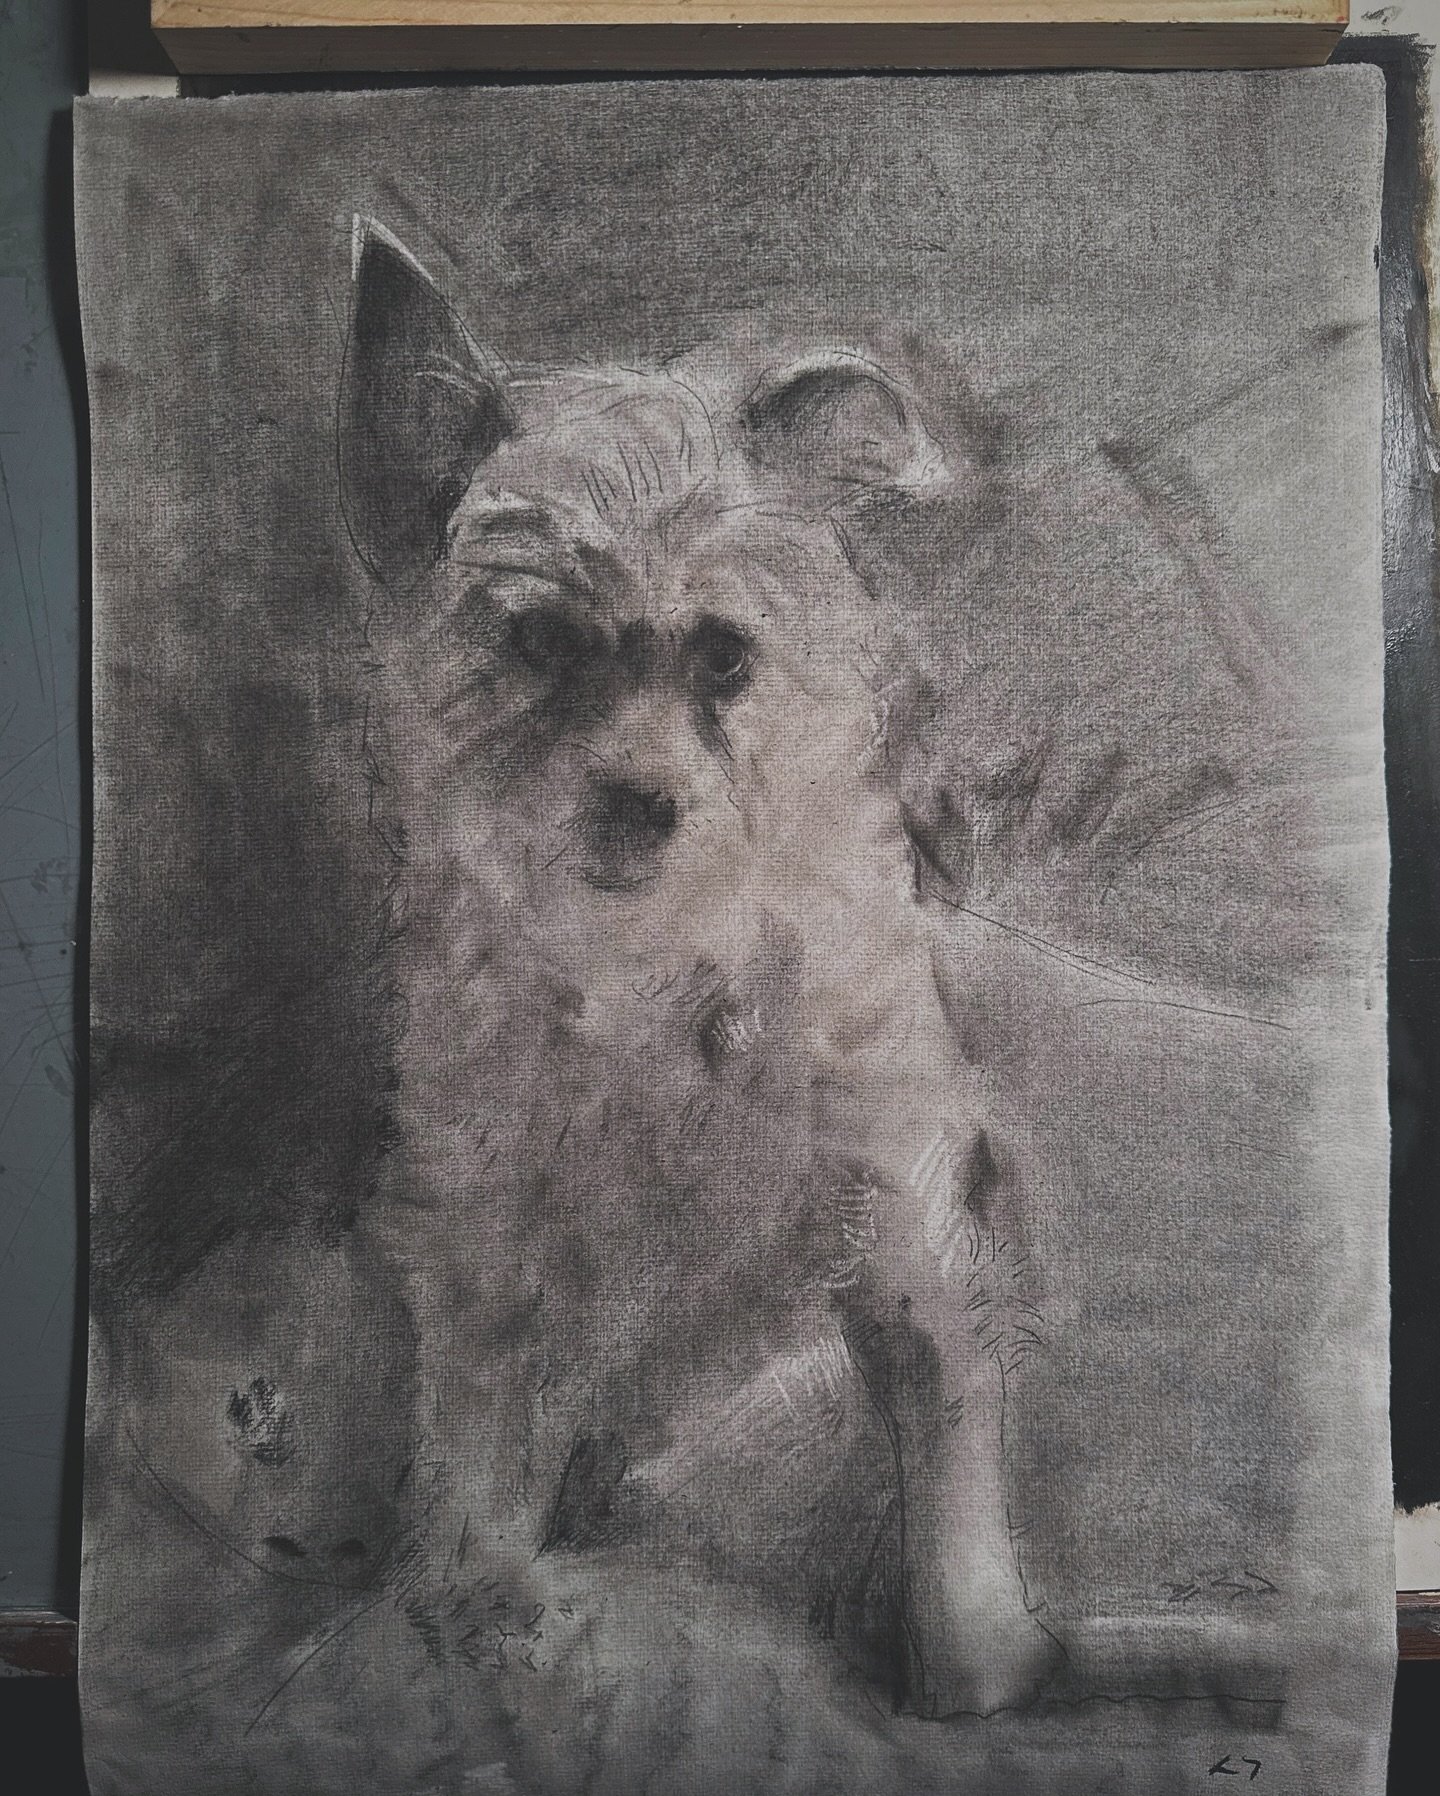 Portrait with willow charcoal on ingres paper.
16x20 inches.

#charcoaldrawing #jackrussell #hahnem&uuml;hle #niebergart